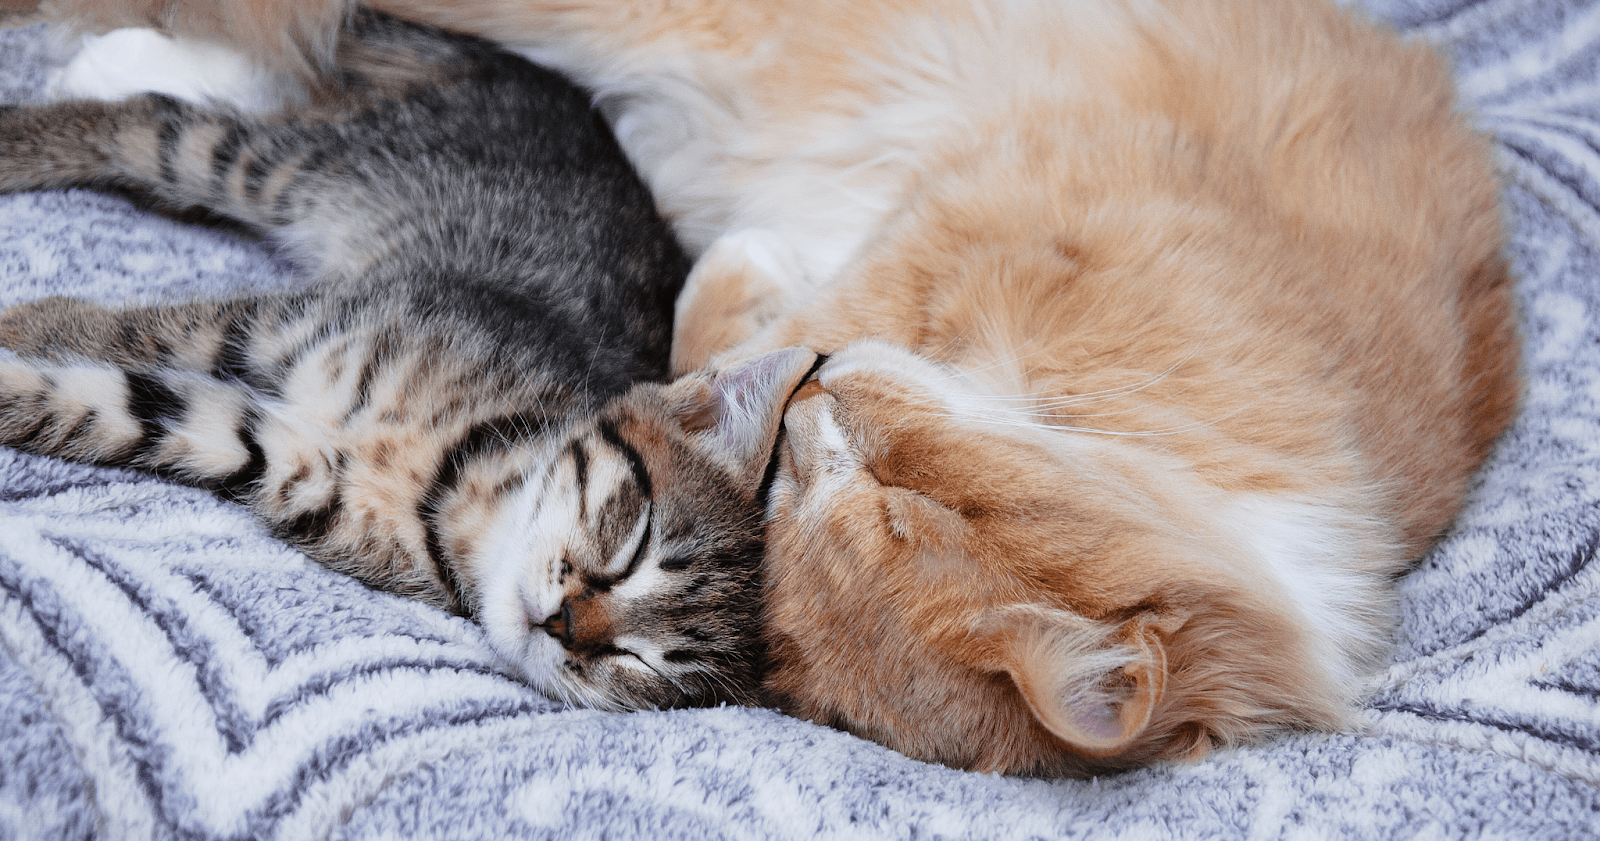 ginger and tabby cat asleep together